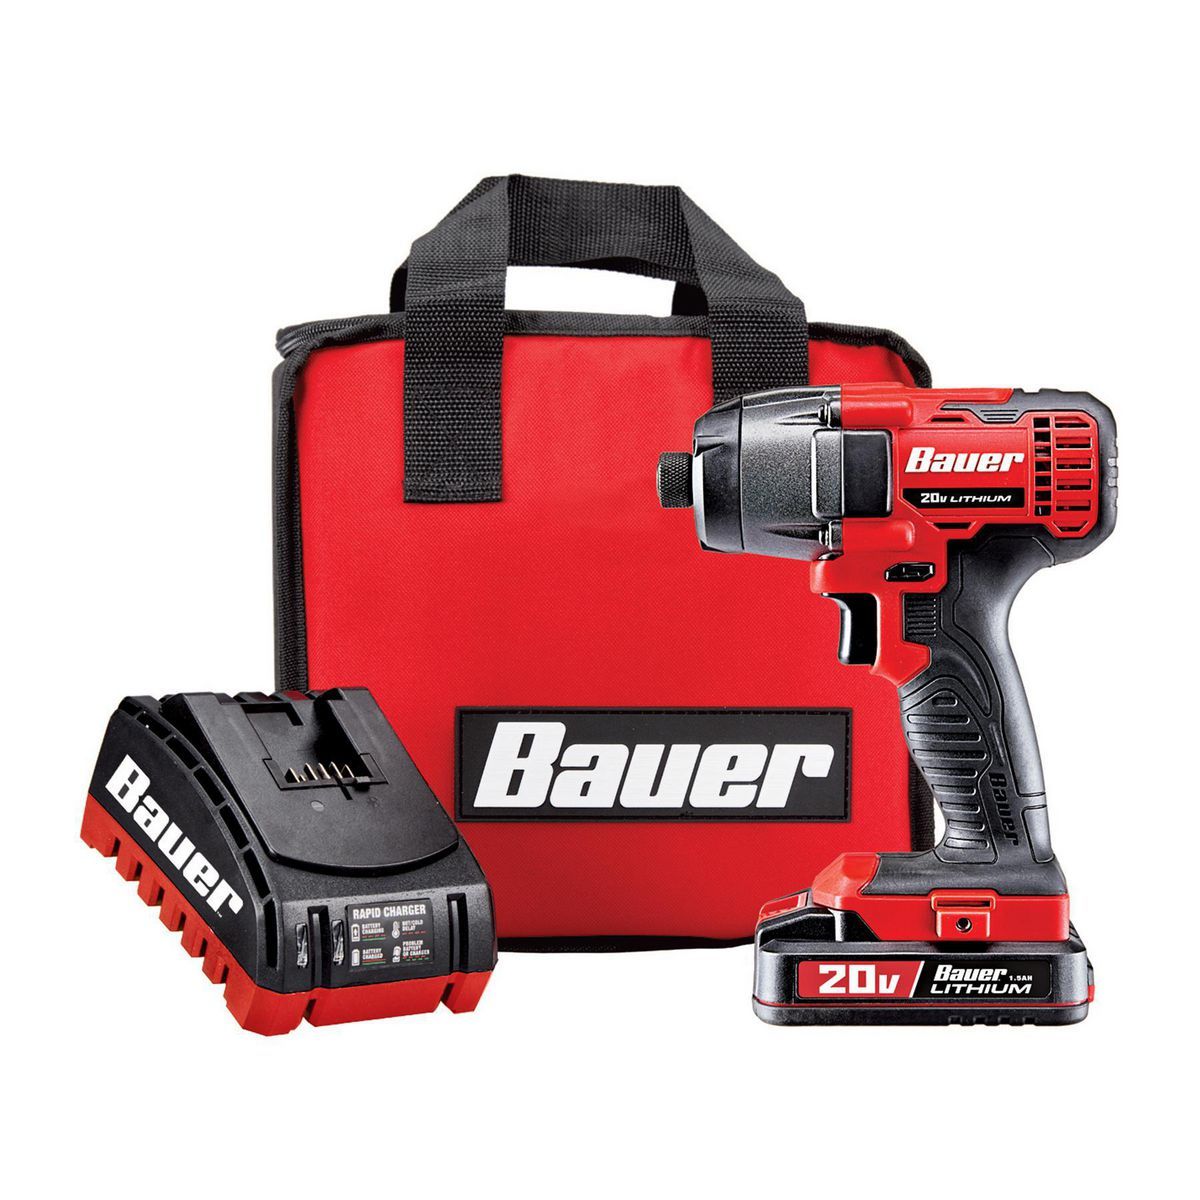 20V Cordless 1/4 in. Hex Compact Impact Driver Kit with 1.5Ah Battery, Rapid Charger, and Bag